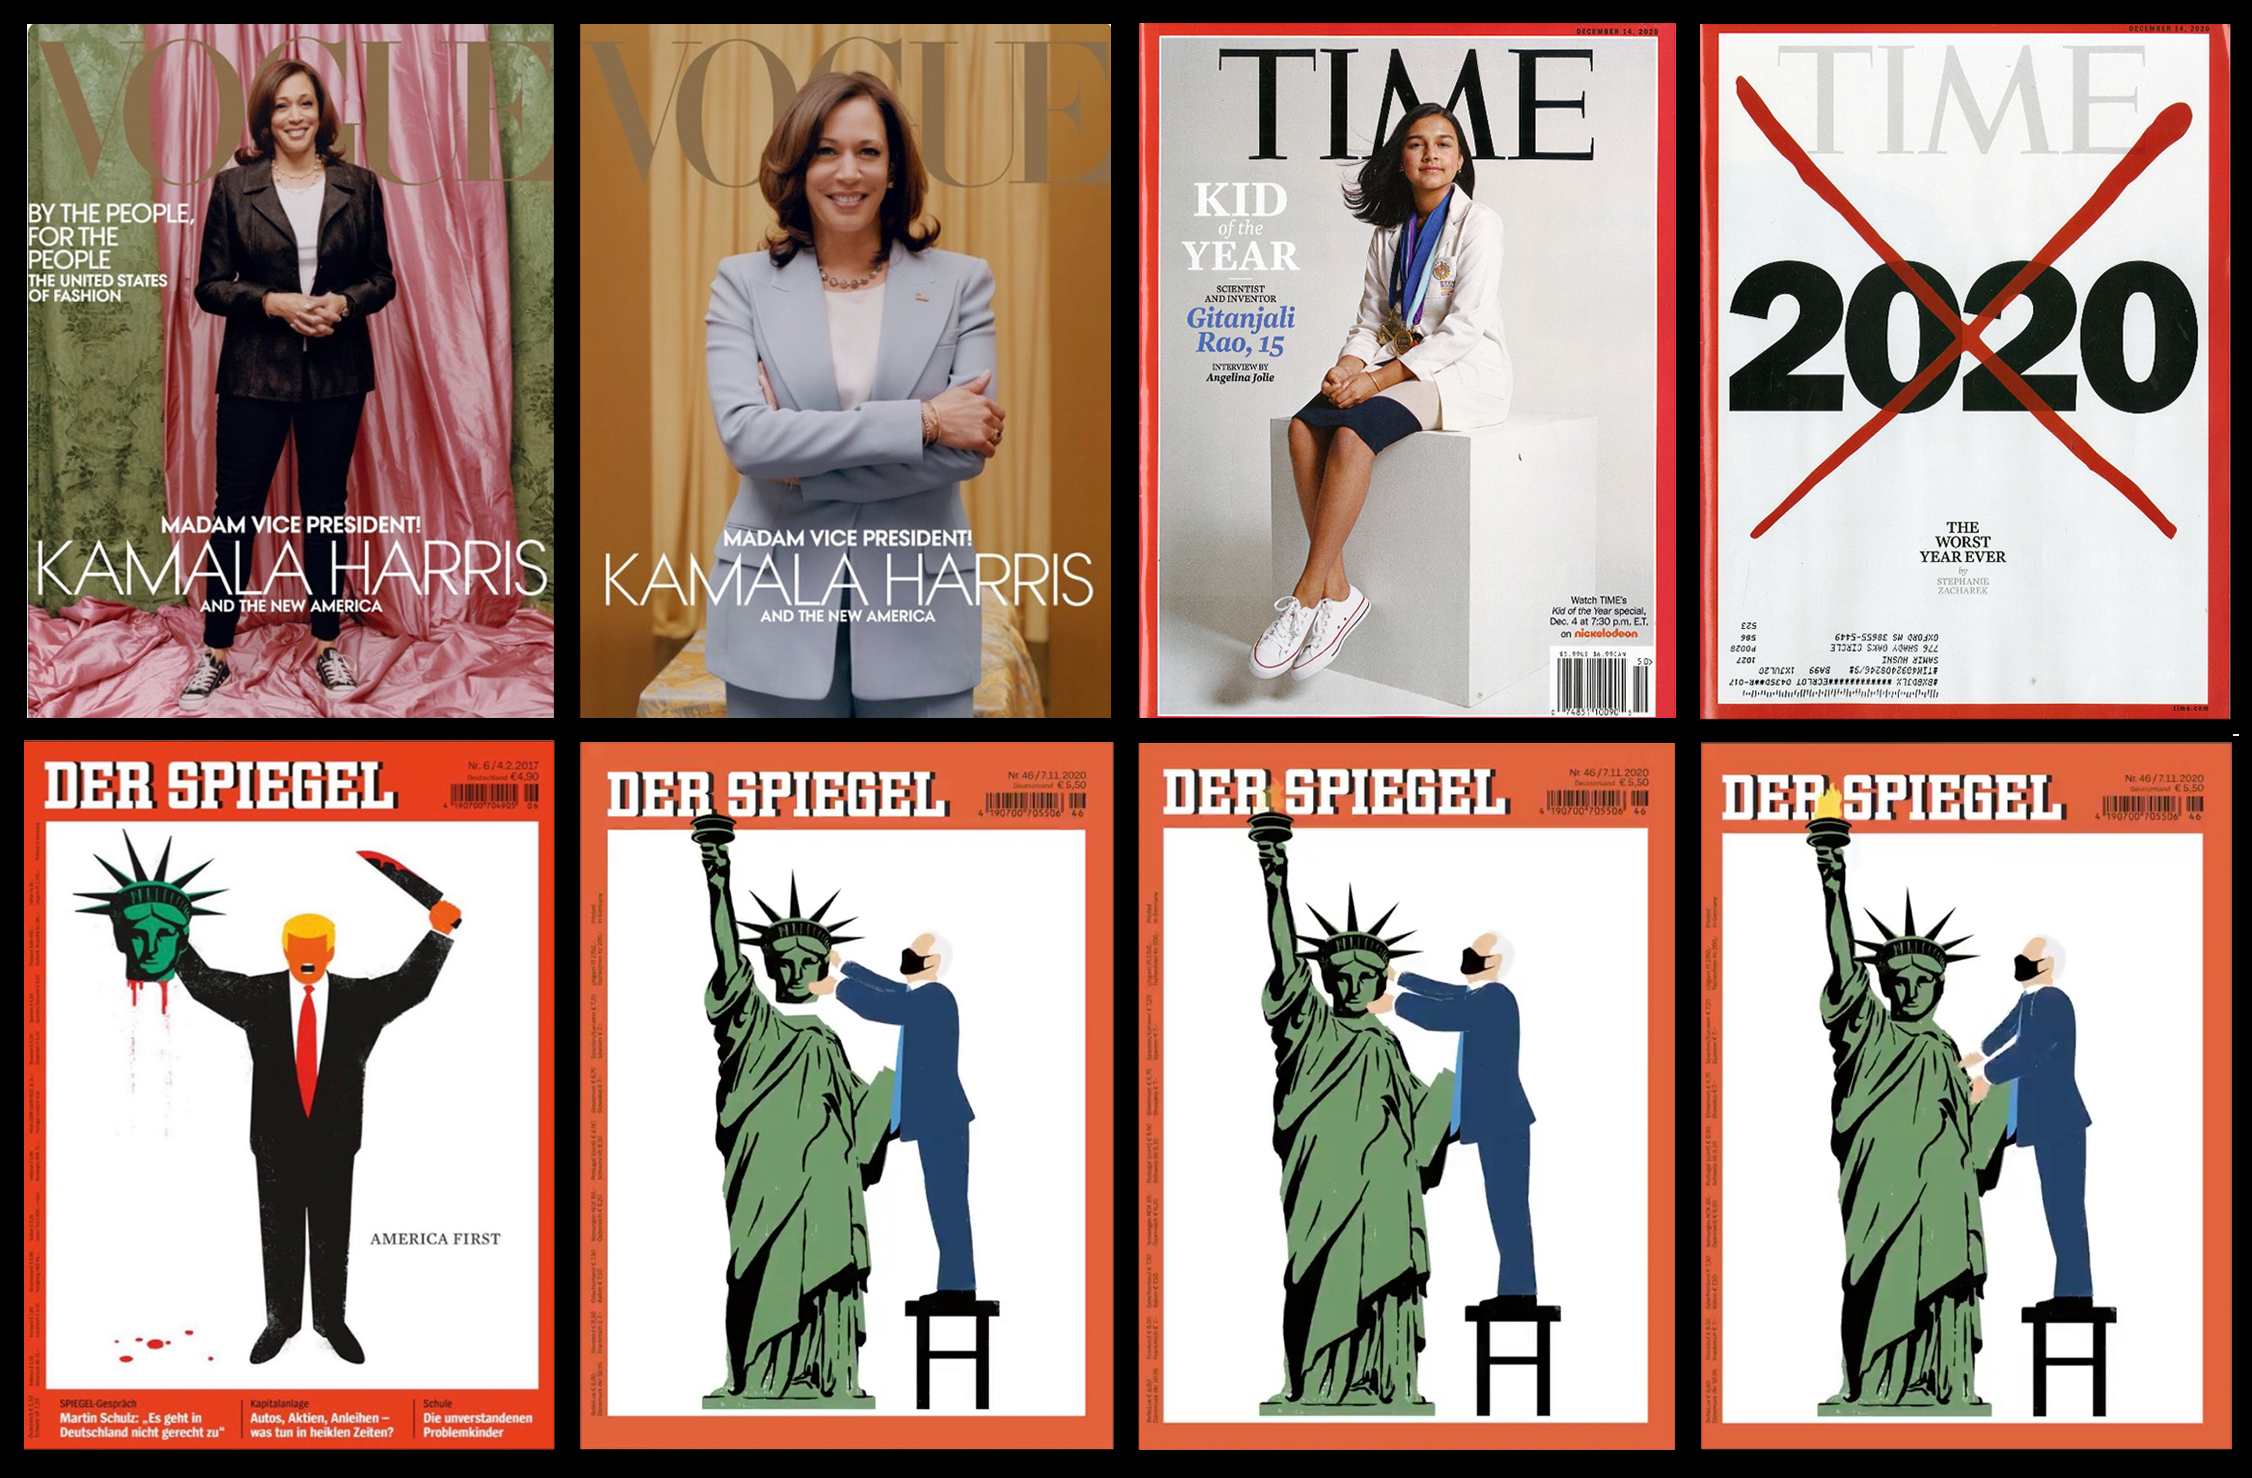 Opinion: In a digital world, magazine covers still carry